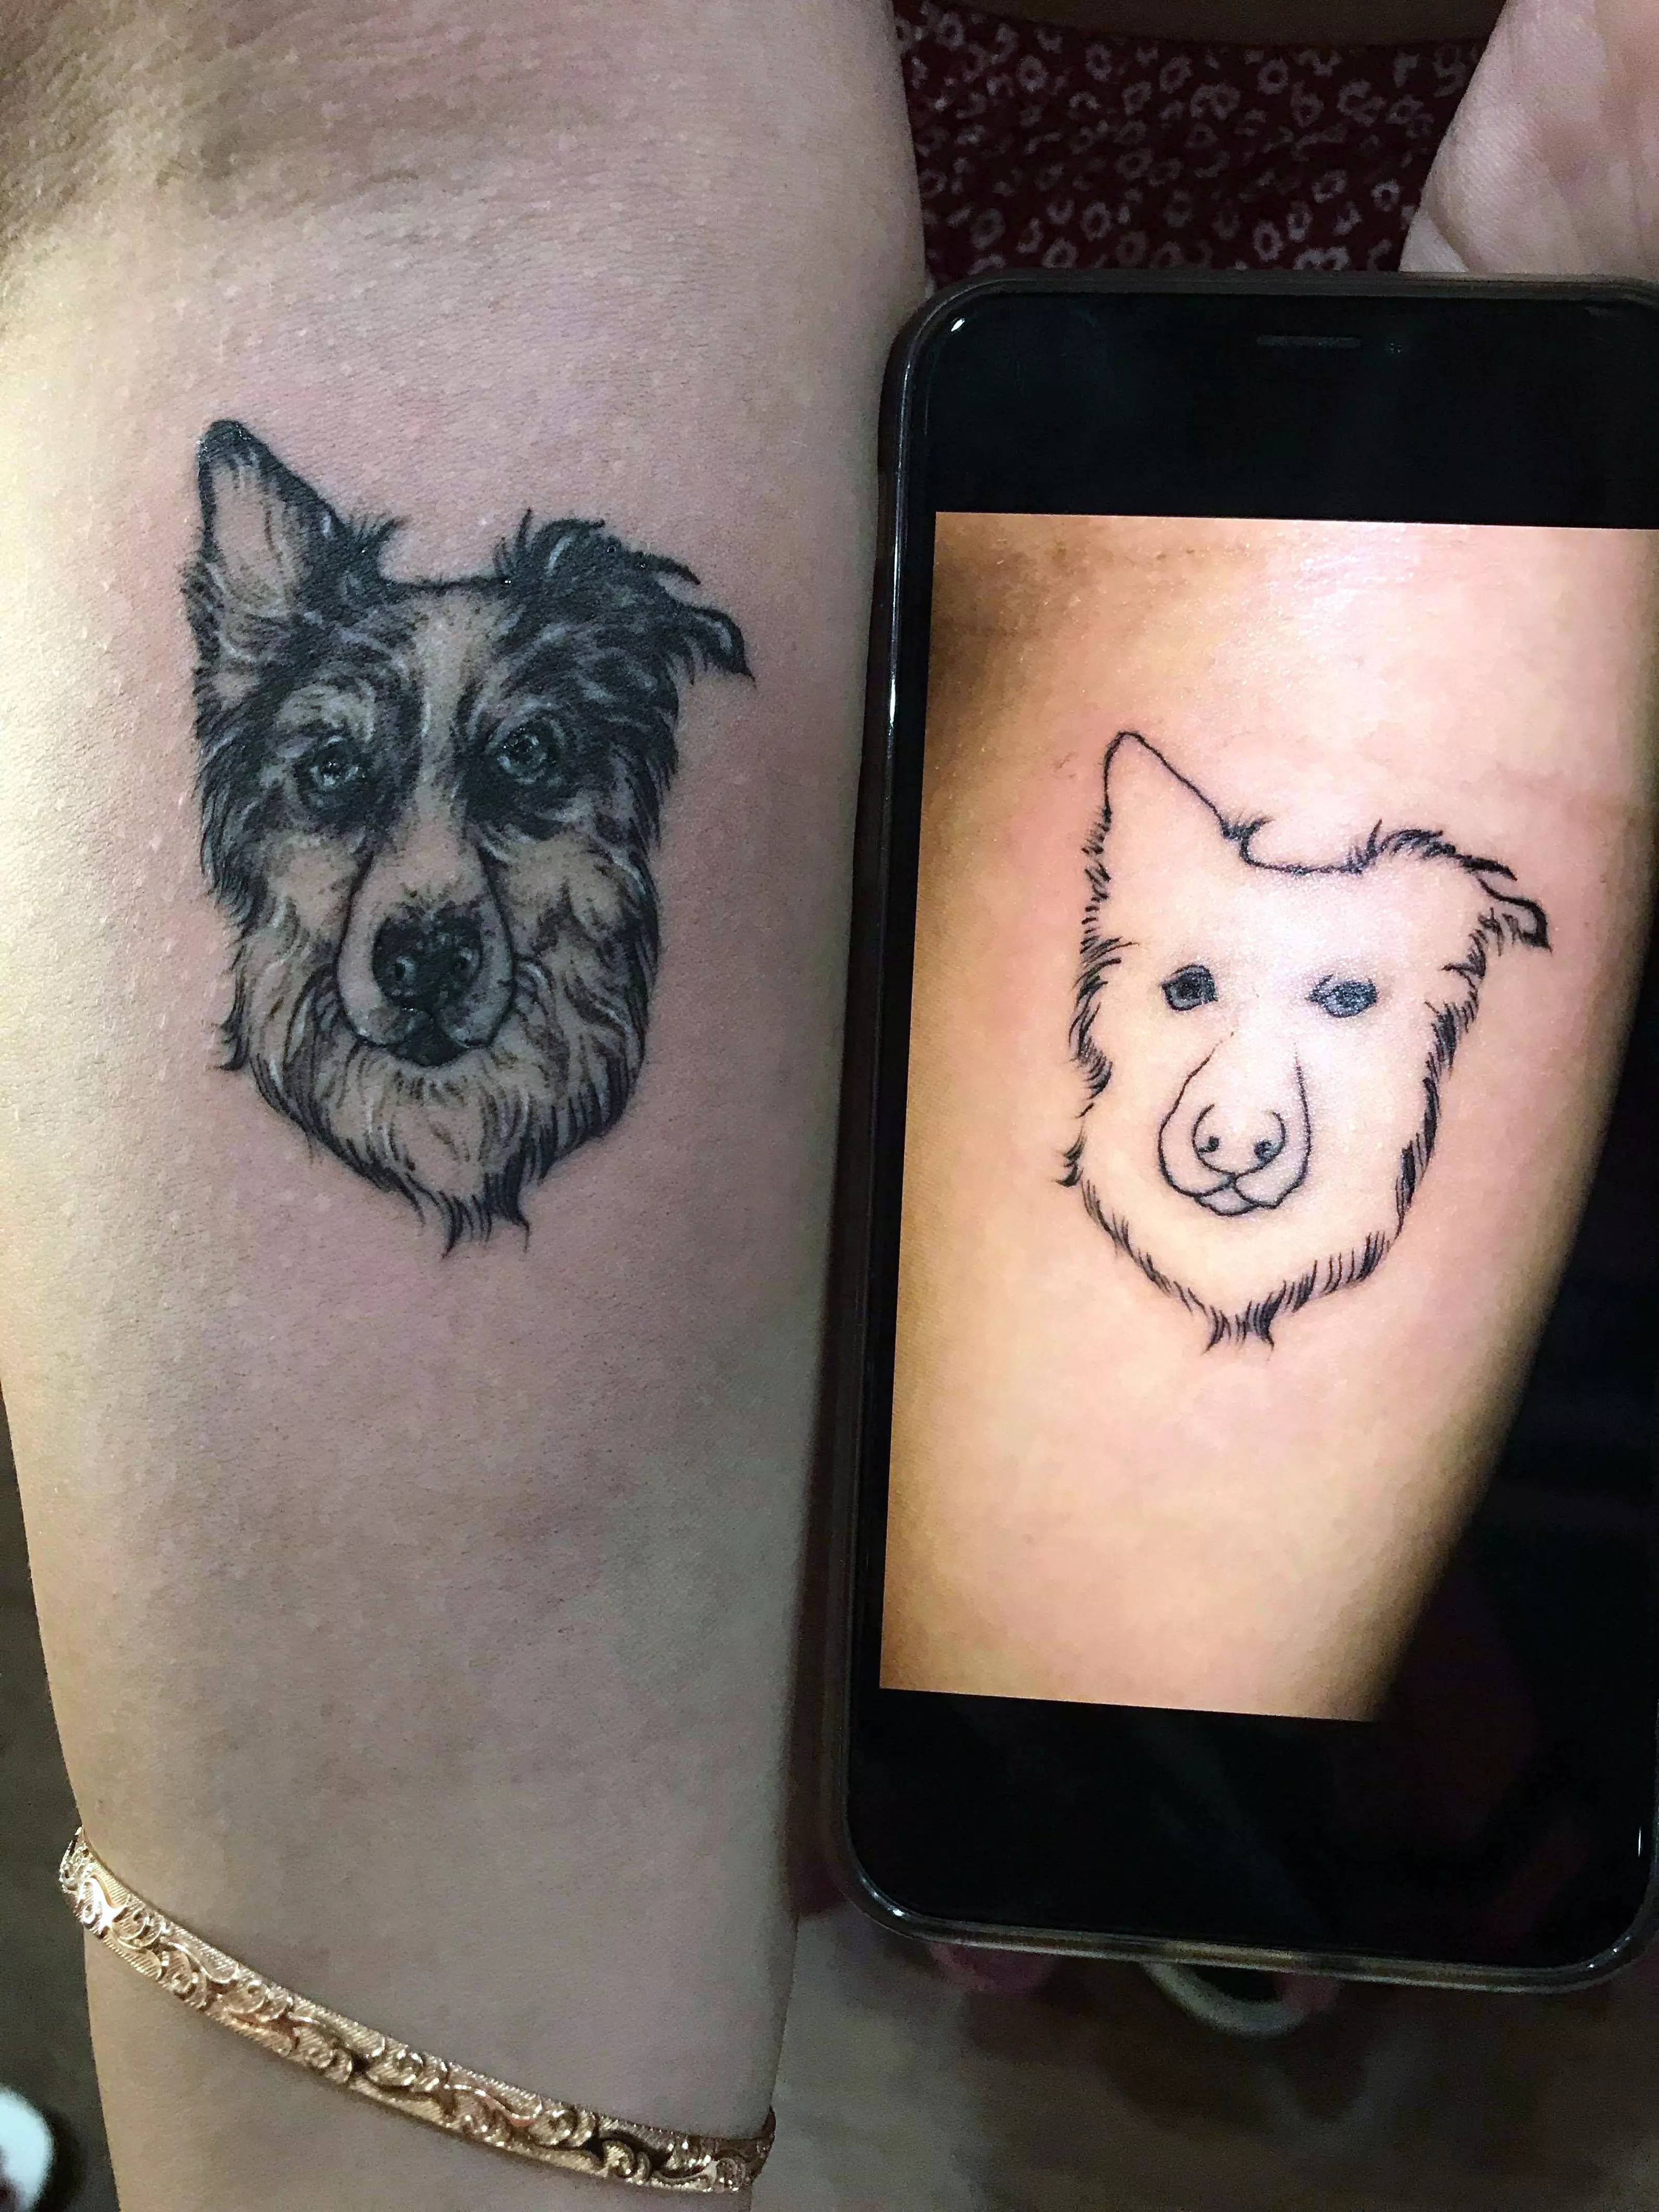 Kayla has now had her tat 'fixed' but here are the two of them side by side.